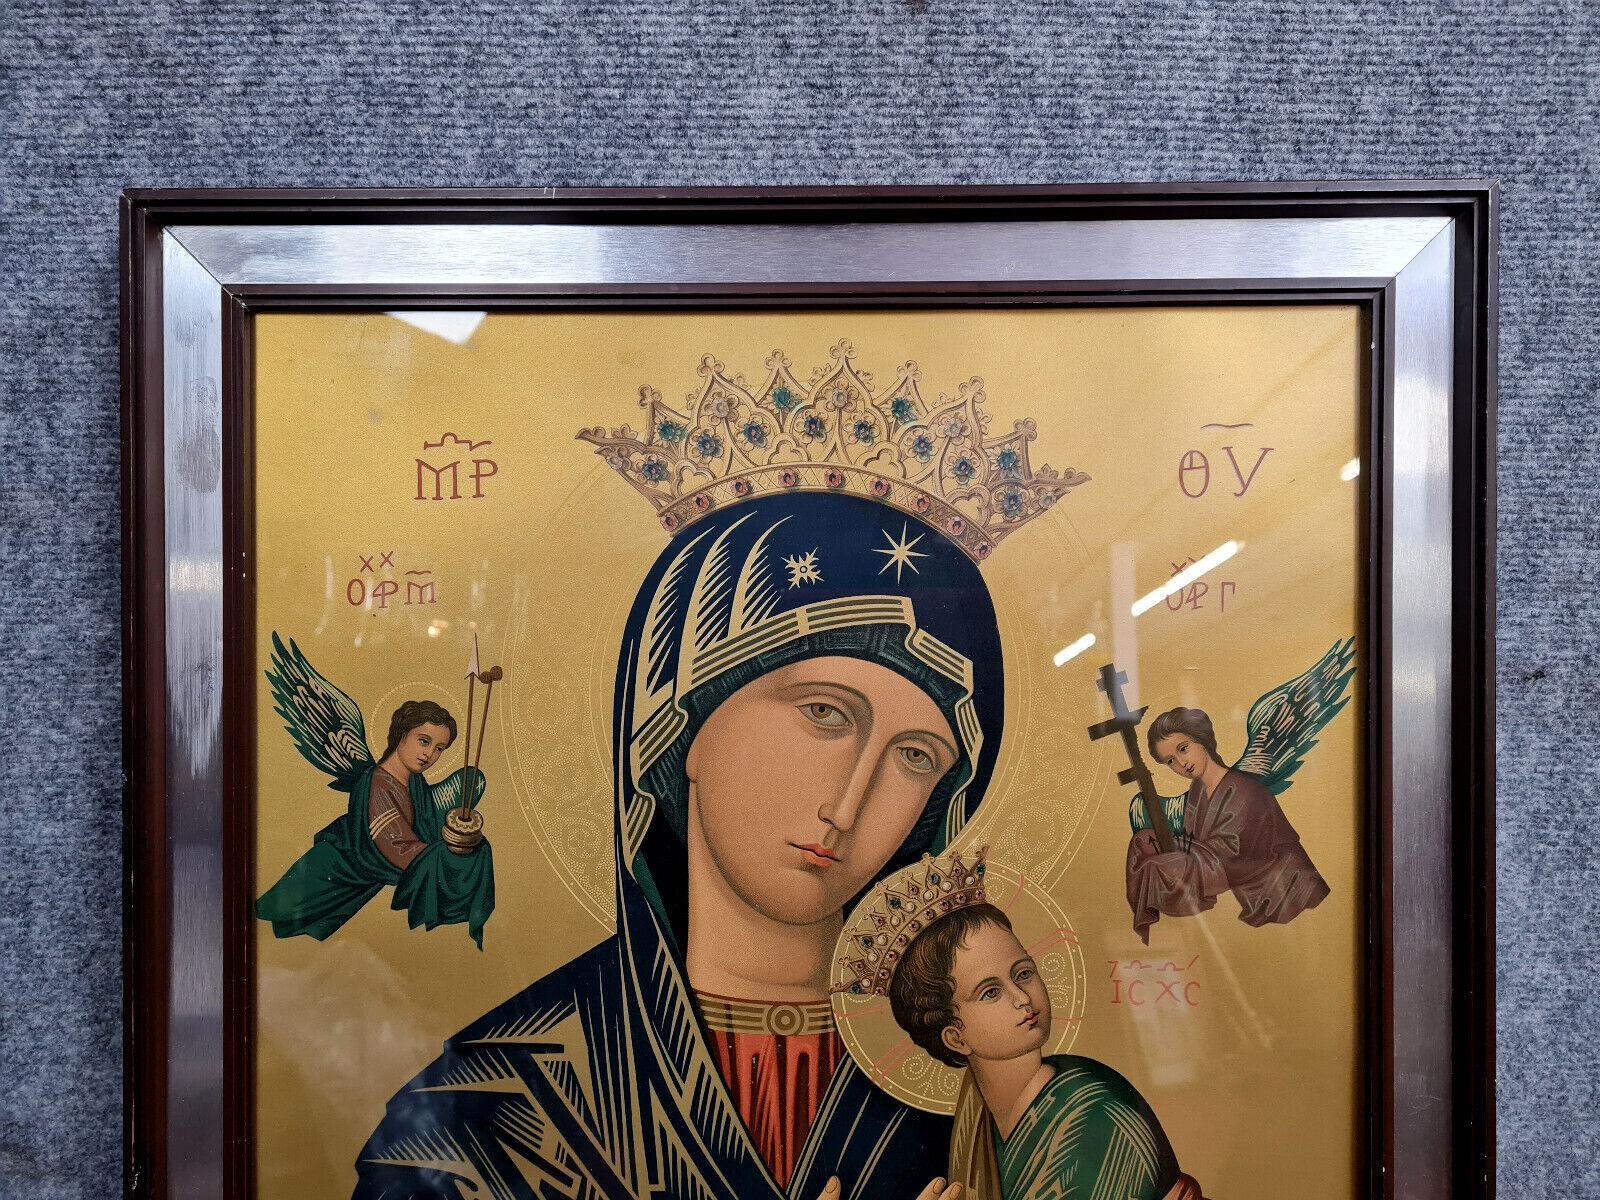 Transport yourself to the mystical world of Russian art with this 19th-century icon, crafted in watercolor with inscriptions dating back to the 1880s. Executed on a cardboard support, this exquisite piece showcases intricate detailing and spiritual